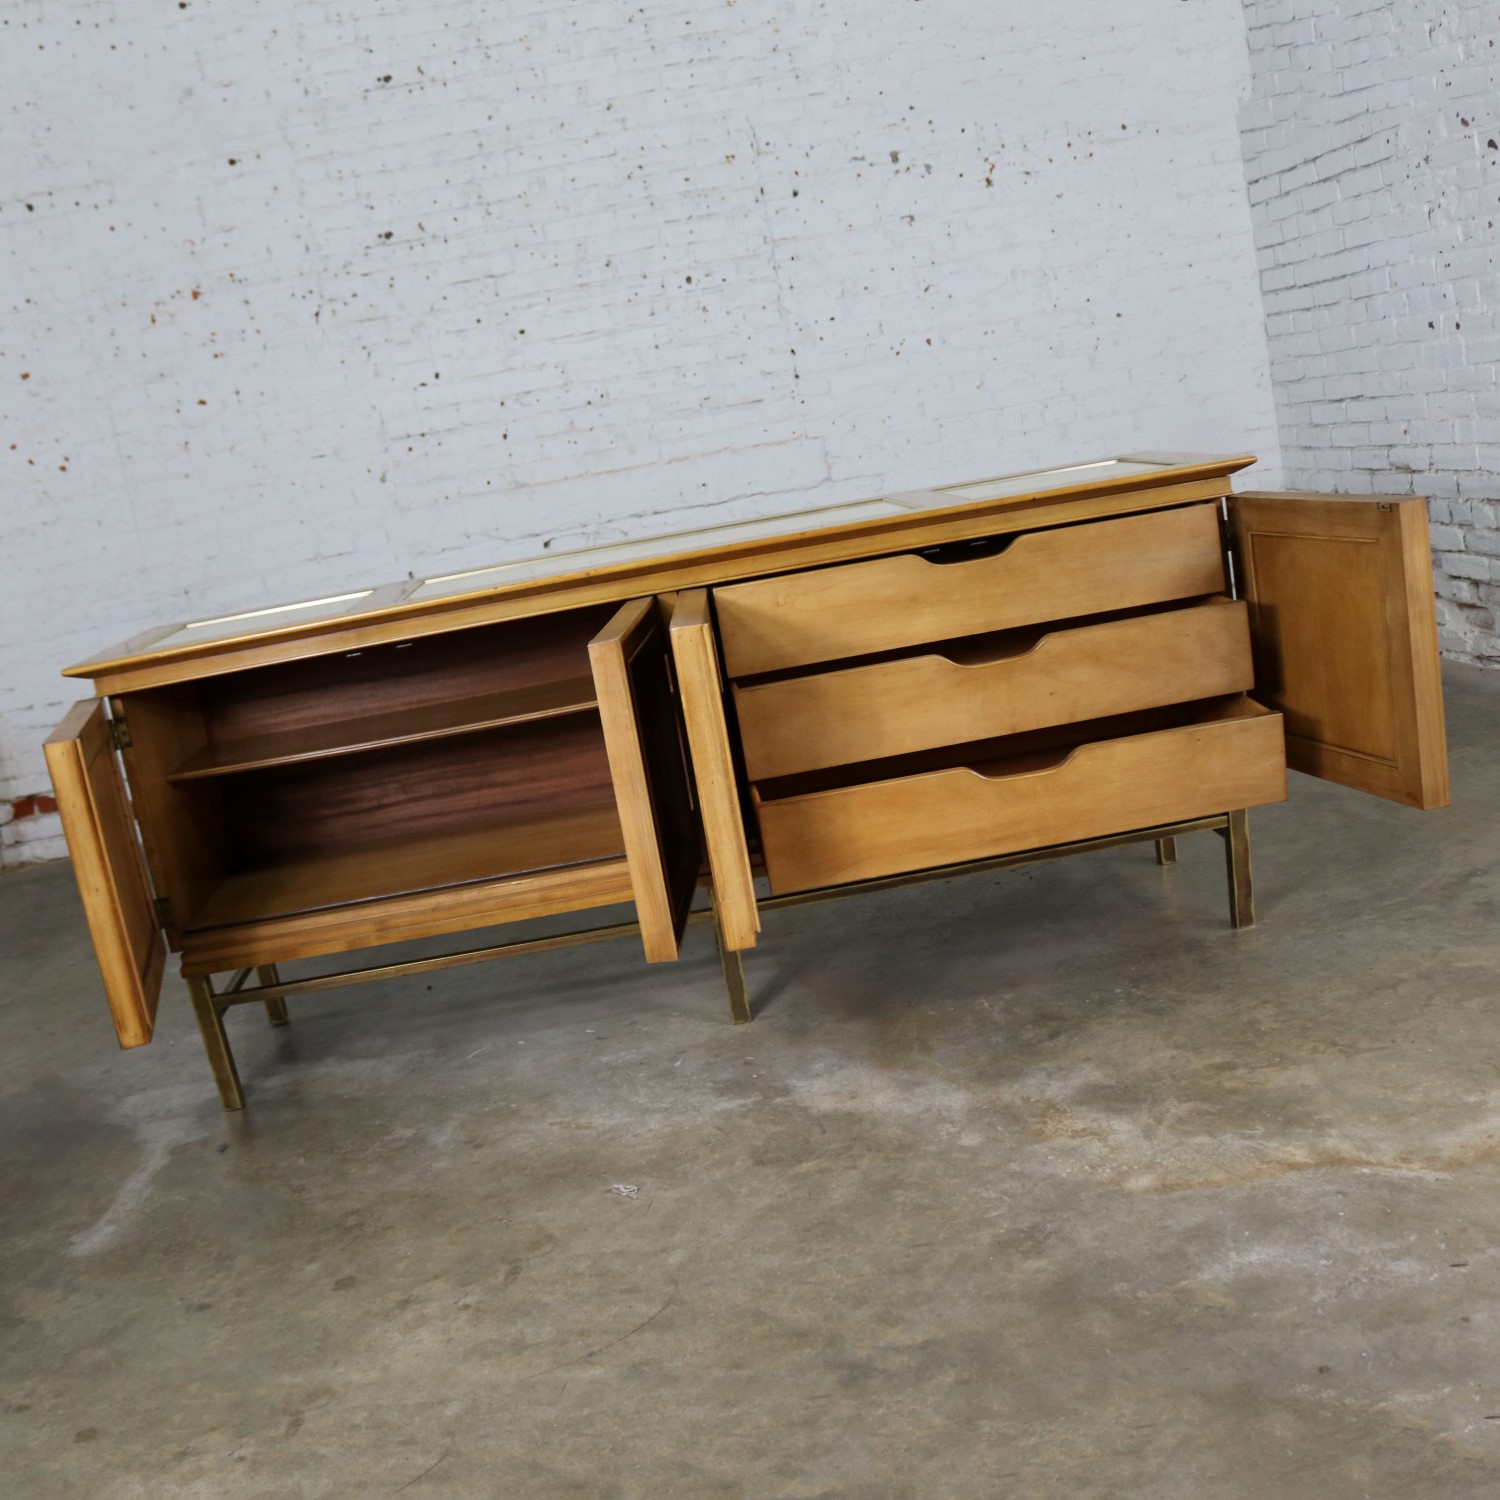 Mid Century Modern Credenza with Hutch Attributed to J. L. Metz Contempora Line